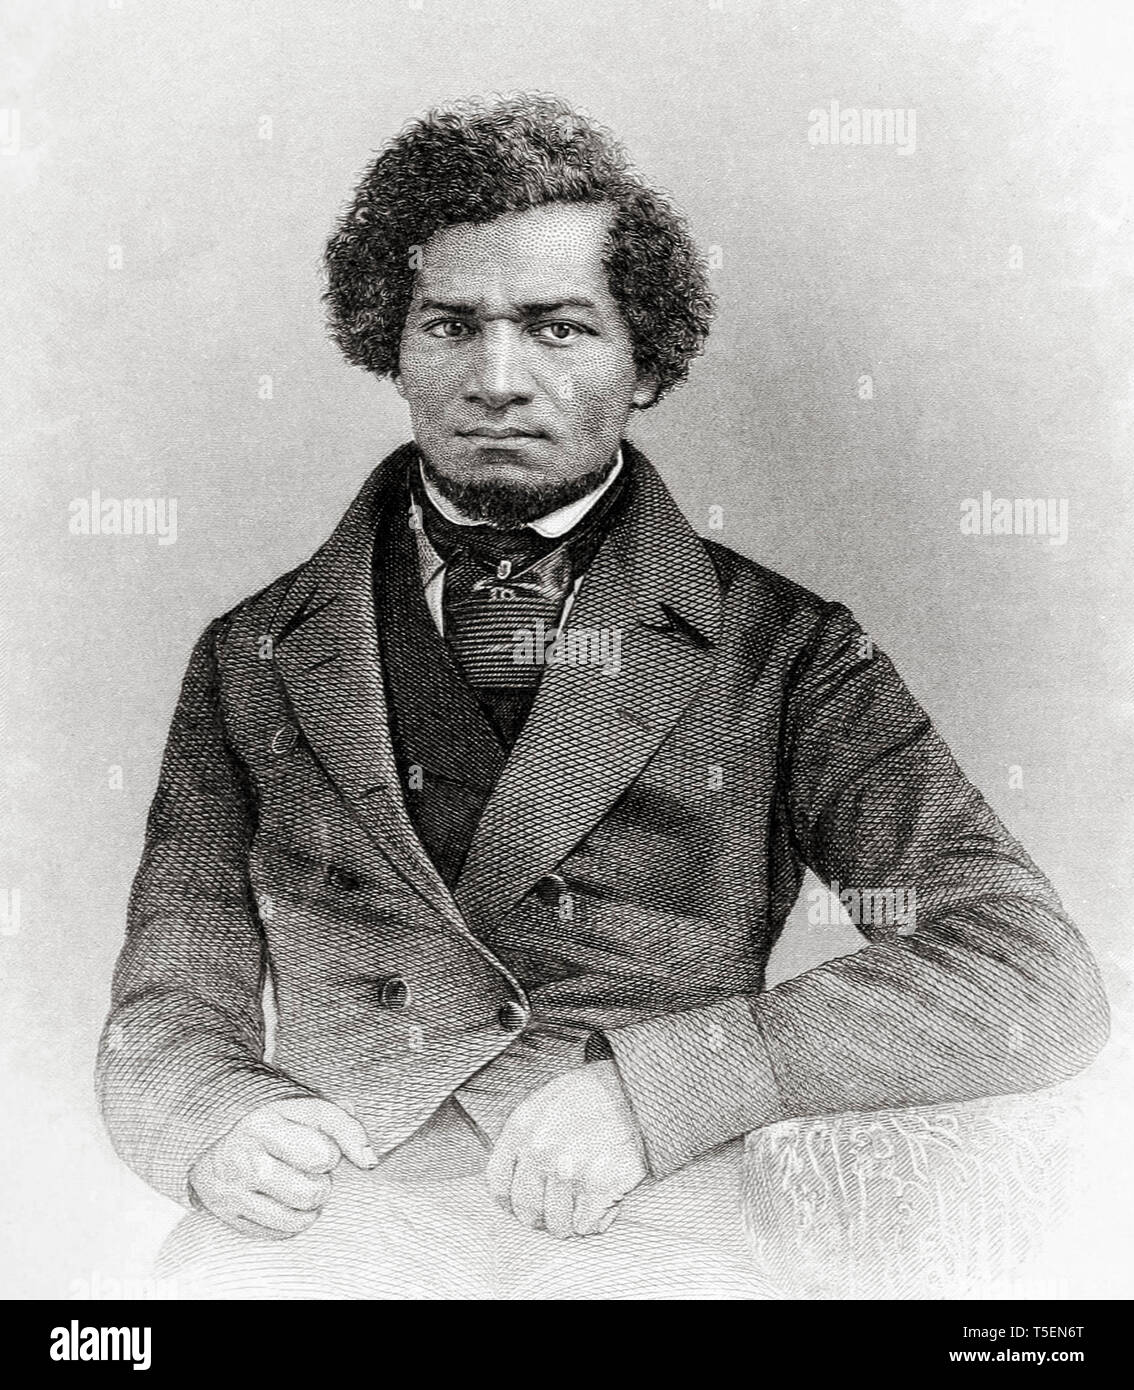 Frederick Douglass (1818-1895) as a younger man, 1855, Engraved by J.C. Buttre from a daguerretotype Stock Photo